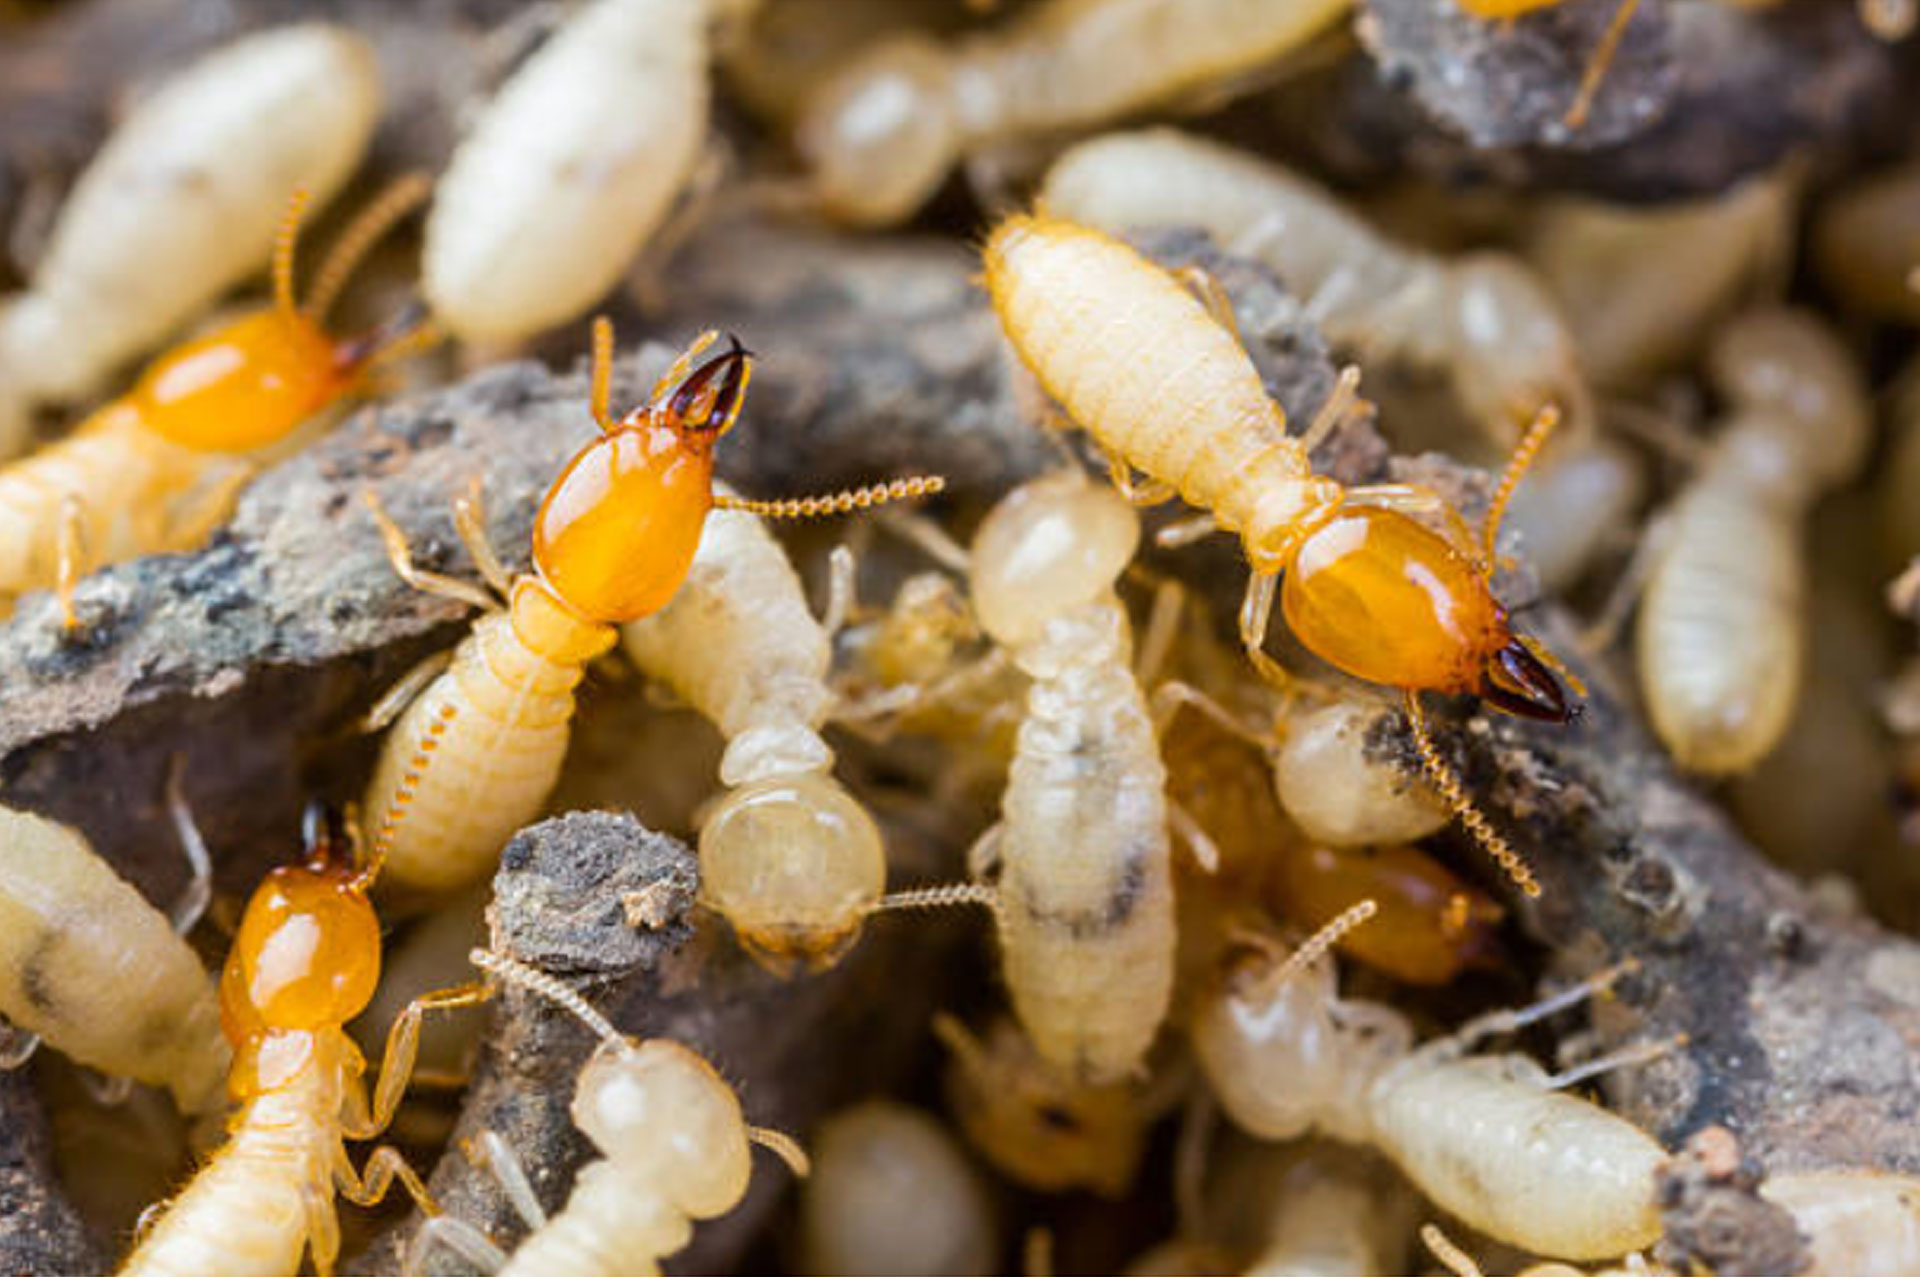 Whats lurking in your attic? OCEANIC PEST CONTROL